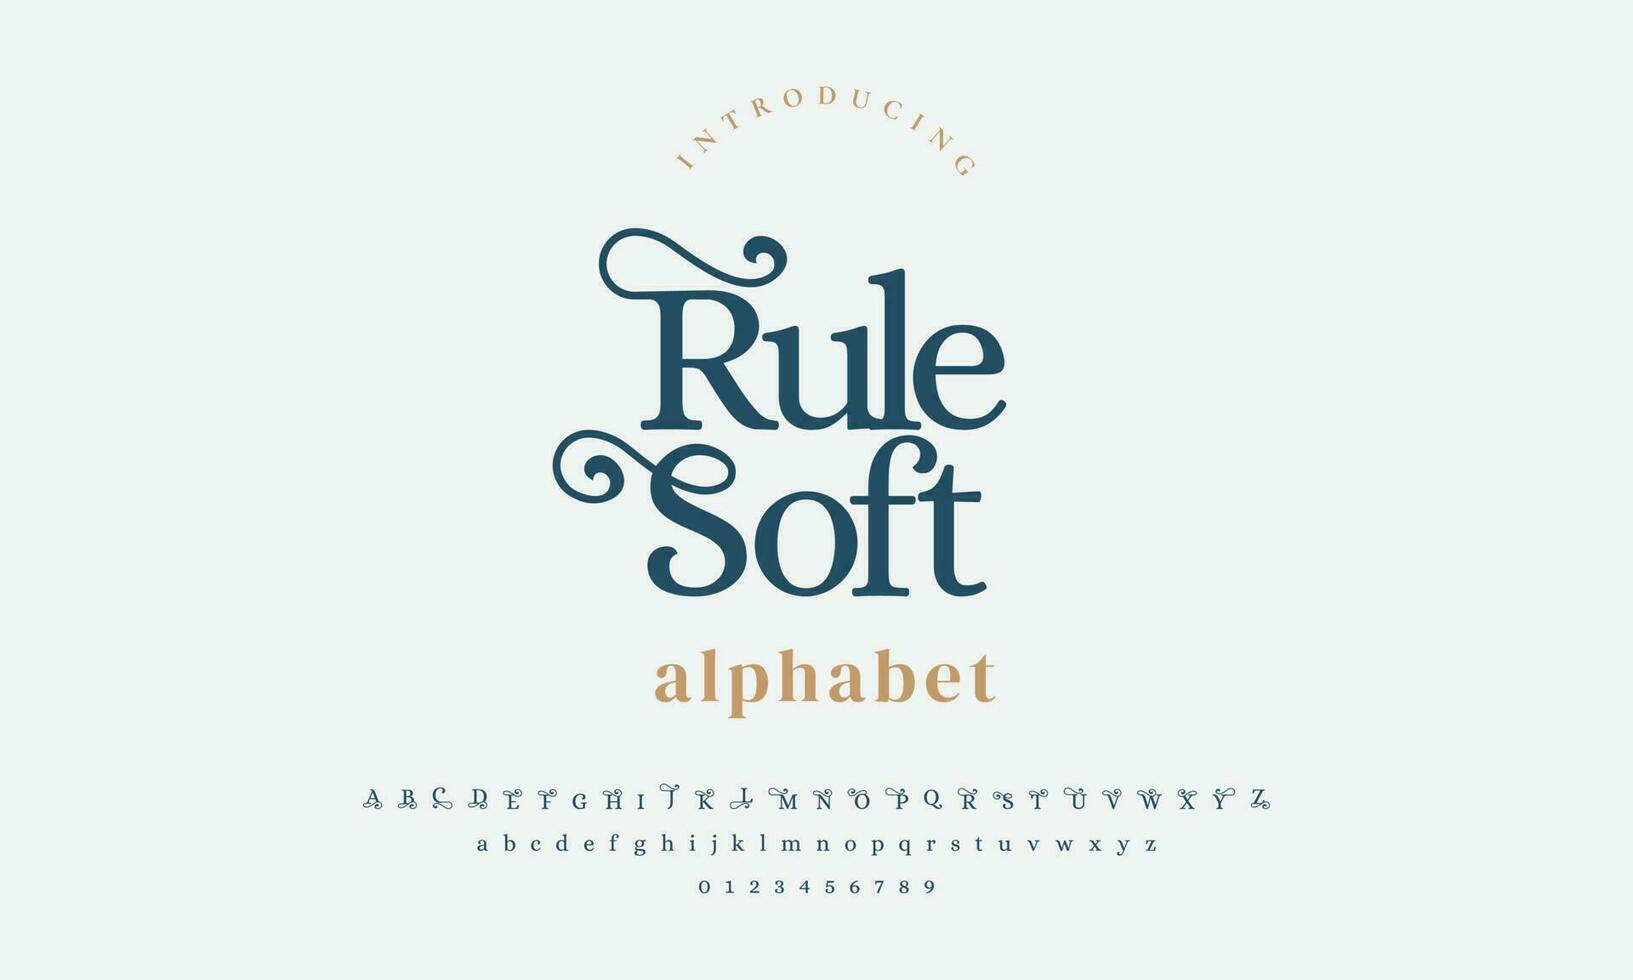 Rulesoft abstract digital technology logo font alphabet. Minimal modern urban fonts for logo, brand etc. Typography typeface uppercase lowercase and number. vector illustration